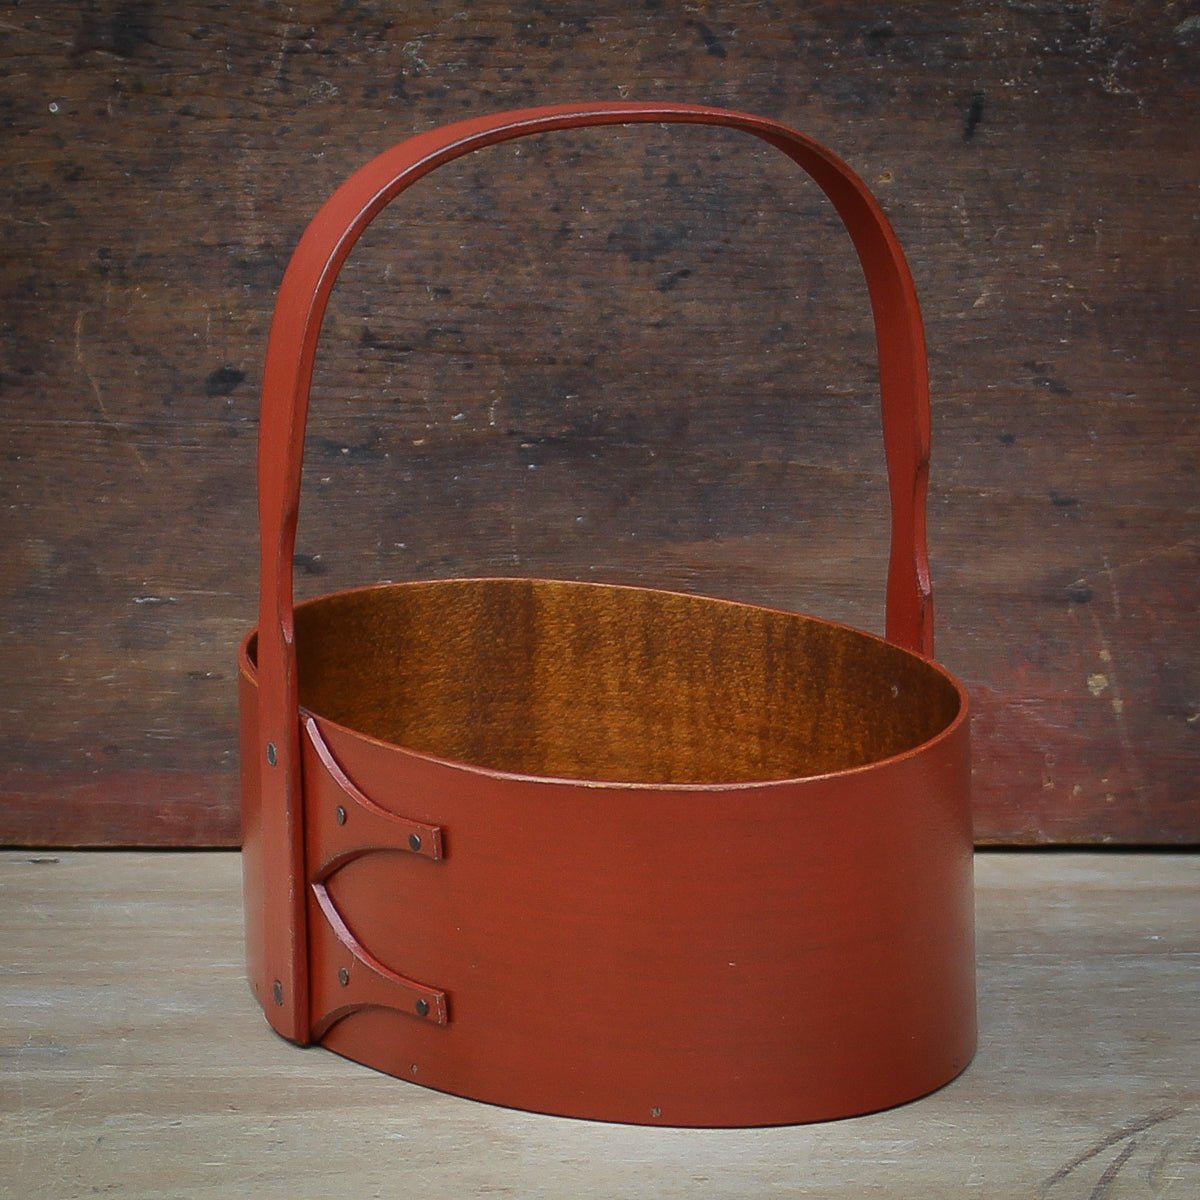 Shaker Carrier, Size #3, LeHays Shaker Boxes, Handcrafted in Maine.  Red Milk Paint Finish, Side View